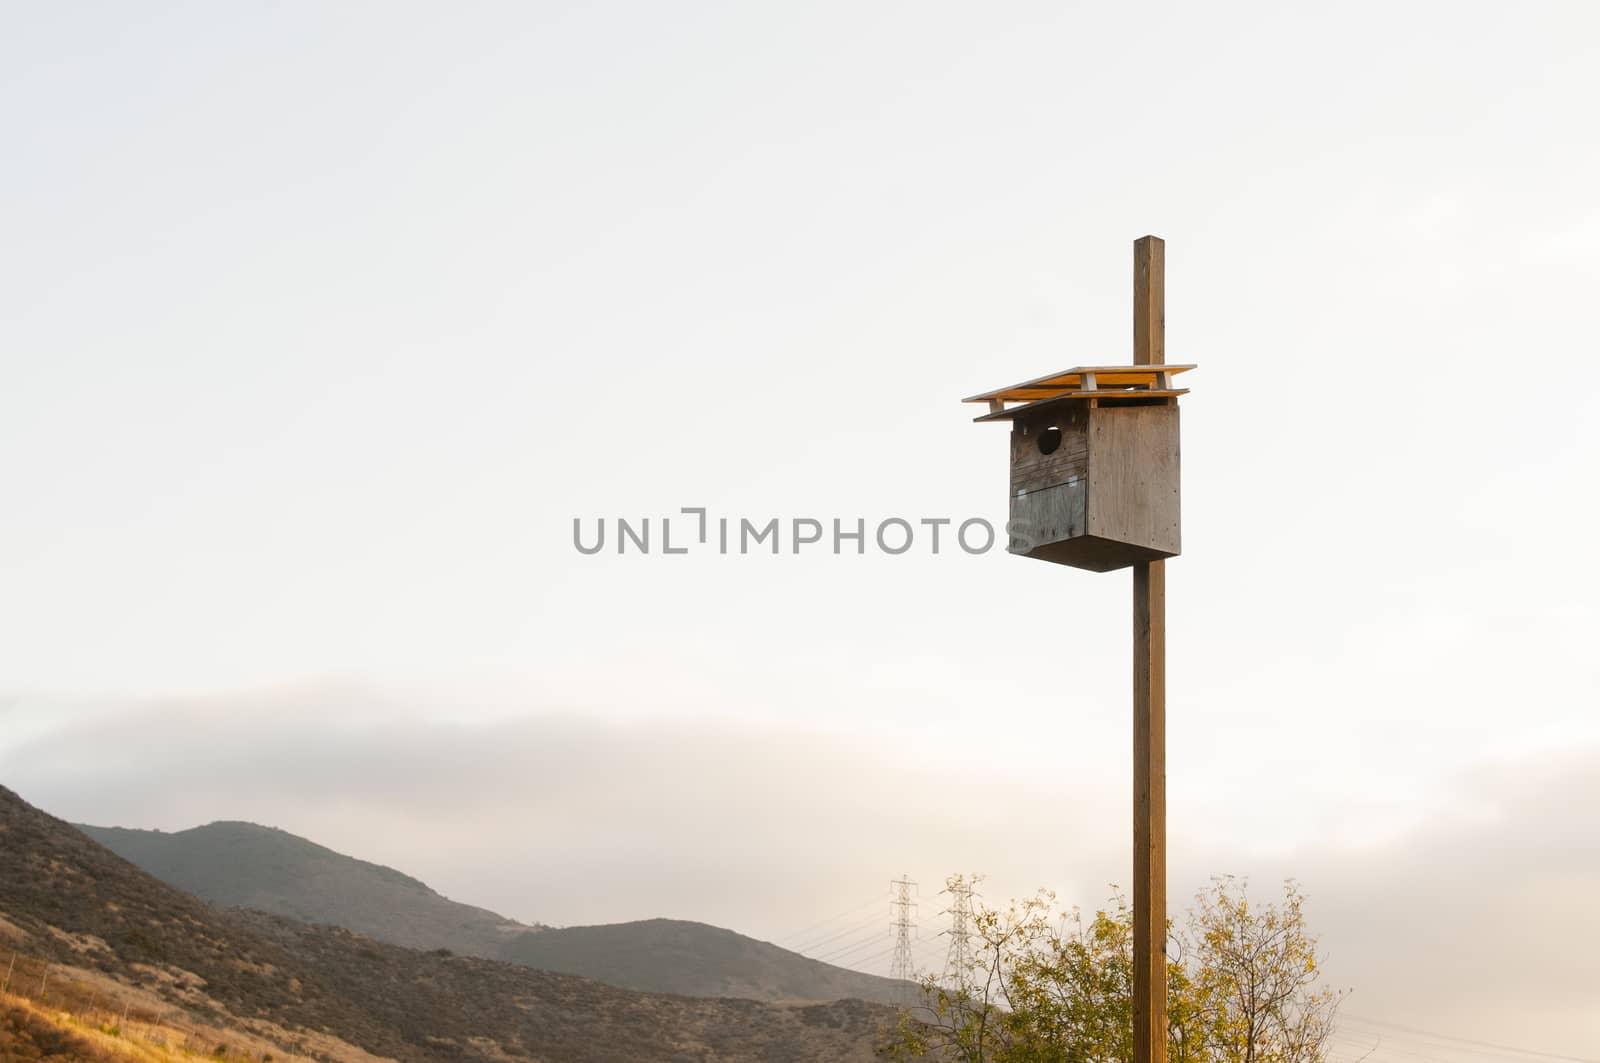 Birdhouse in nature park by Njean